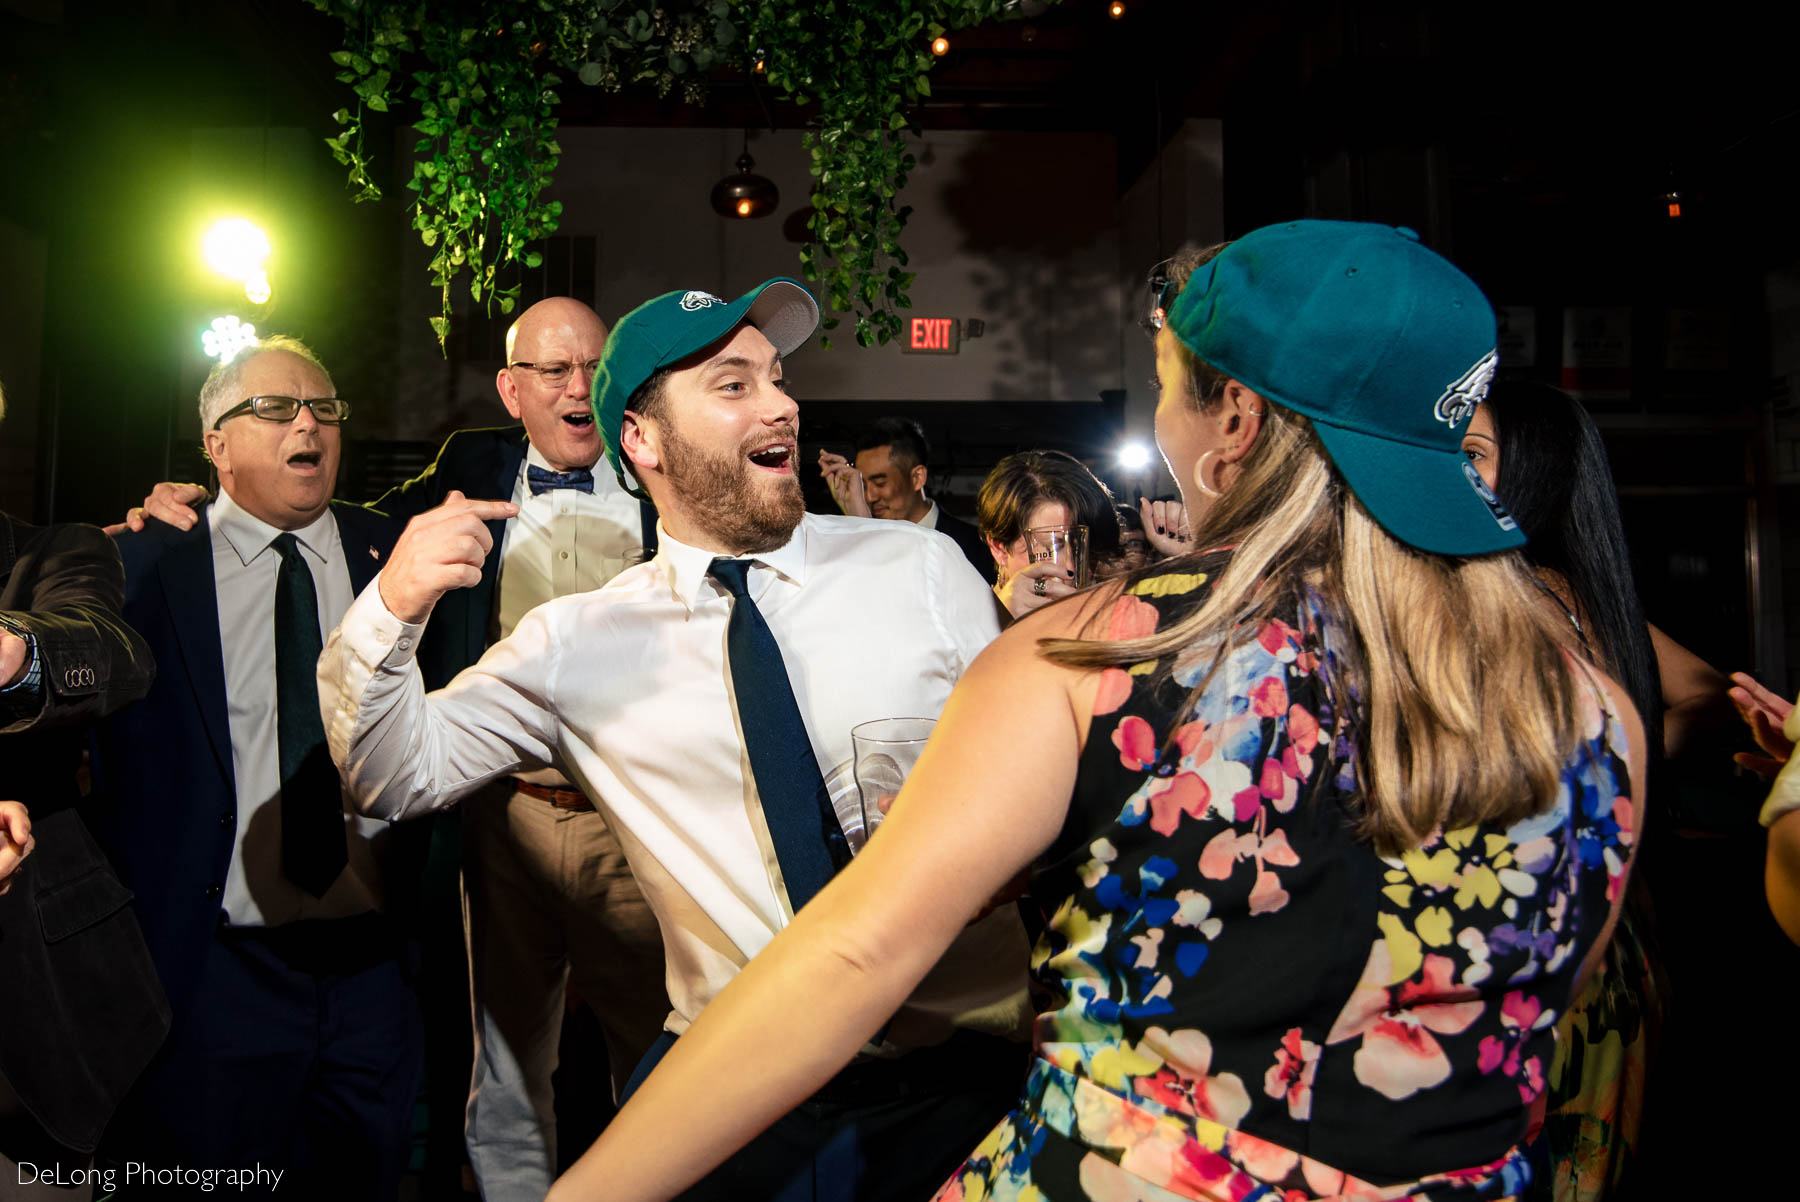 Two guests smiling and dancing together on the dance floor wearing Atlanta Falcons hats at Eventide Brewing in Atlanta, GA by Charlotte wedding Photographers DeLong Photography